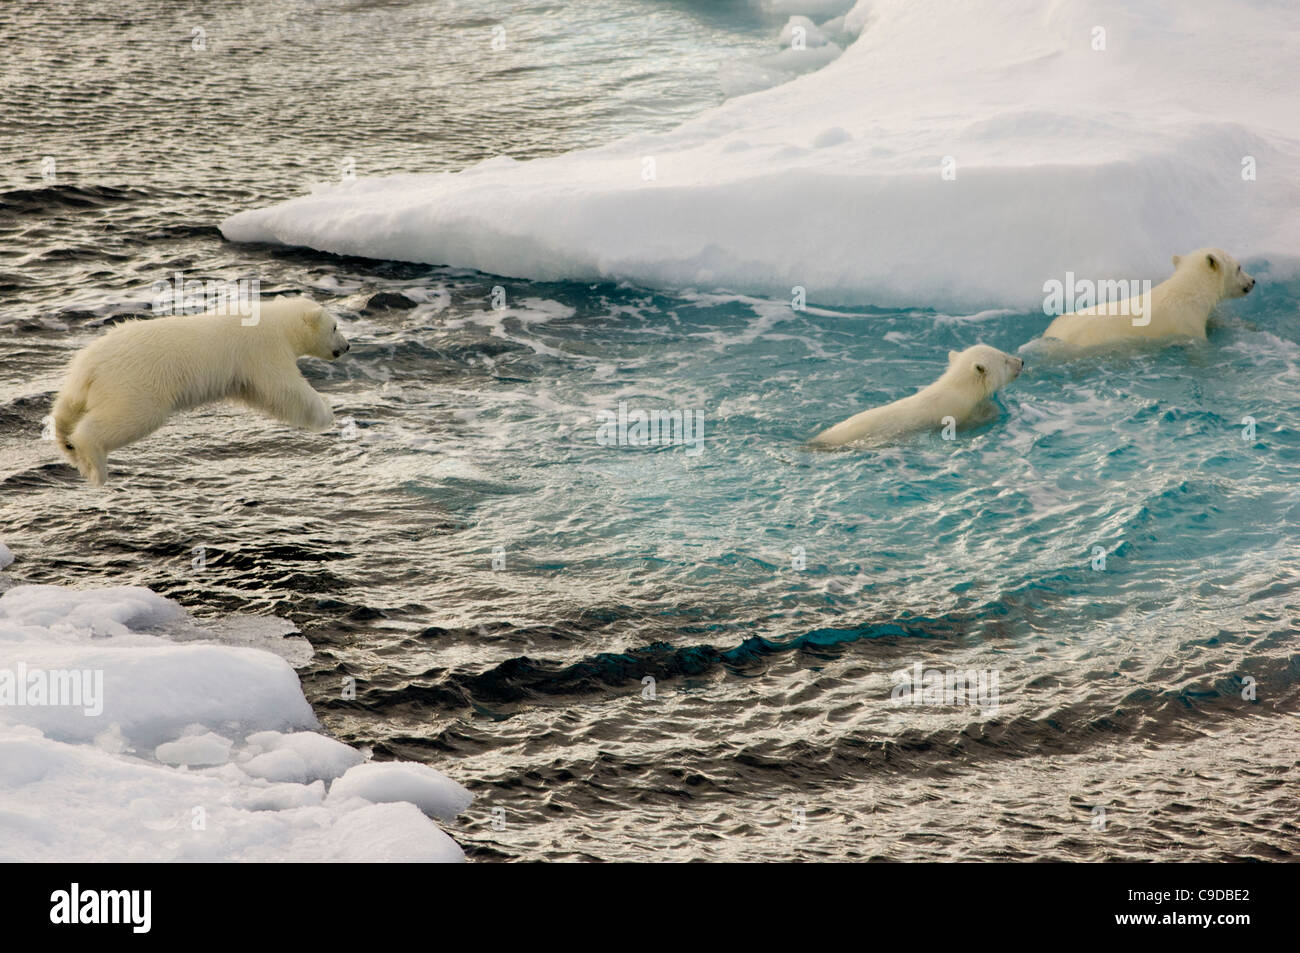 Young Polar Bear cub (Ursus maritimus) jumping into the sea from floating drift ice, after it's two siblings,  Freemansundet (between Barentsøya and Edgeøya), Svalbard Archipelago, Norway Stock Photo